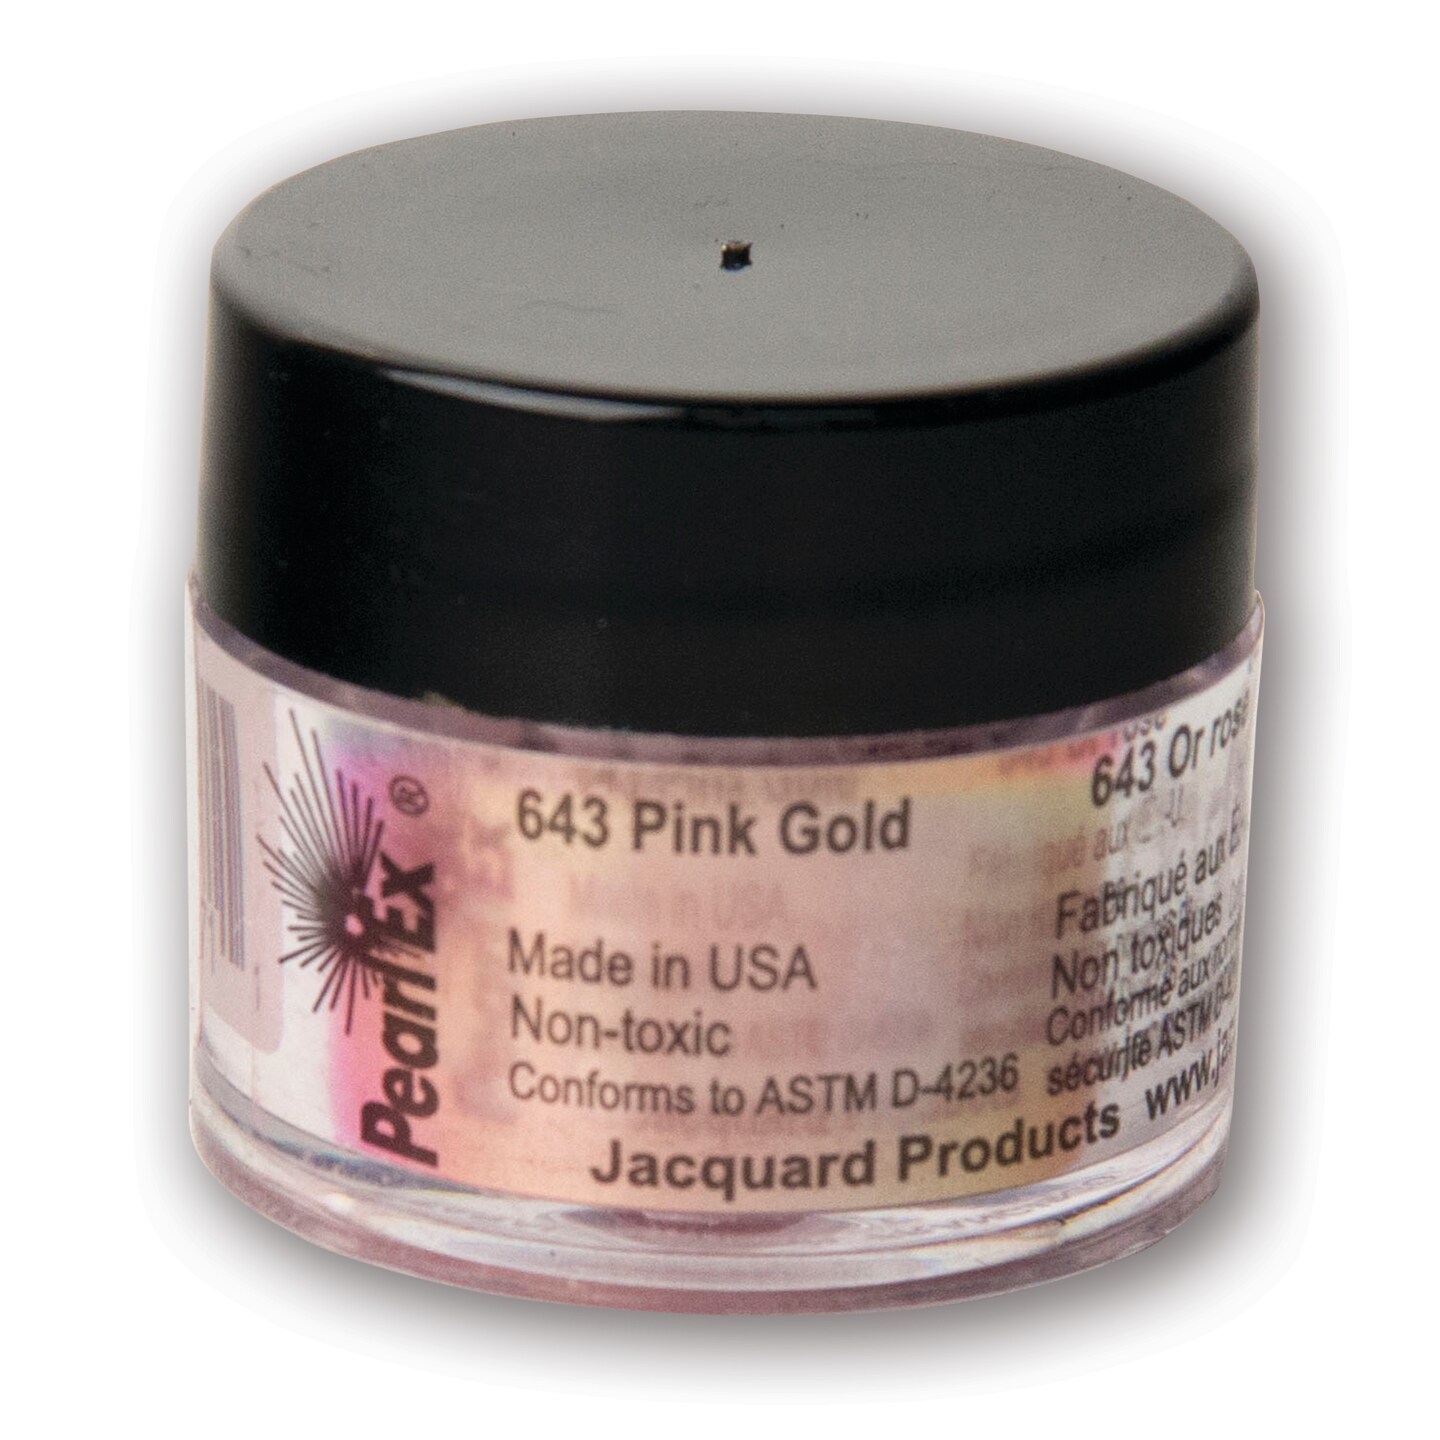 Jacquard Pearl Ex Pigment, 3g, Pink Gold